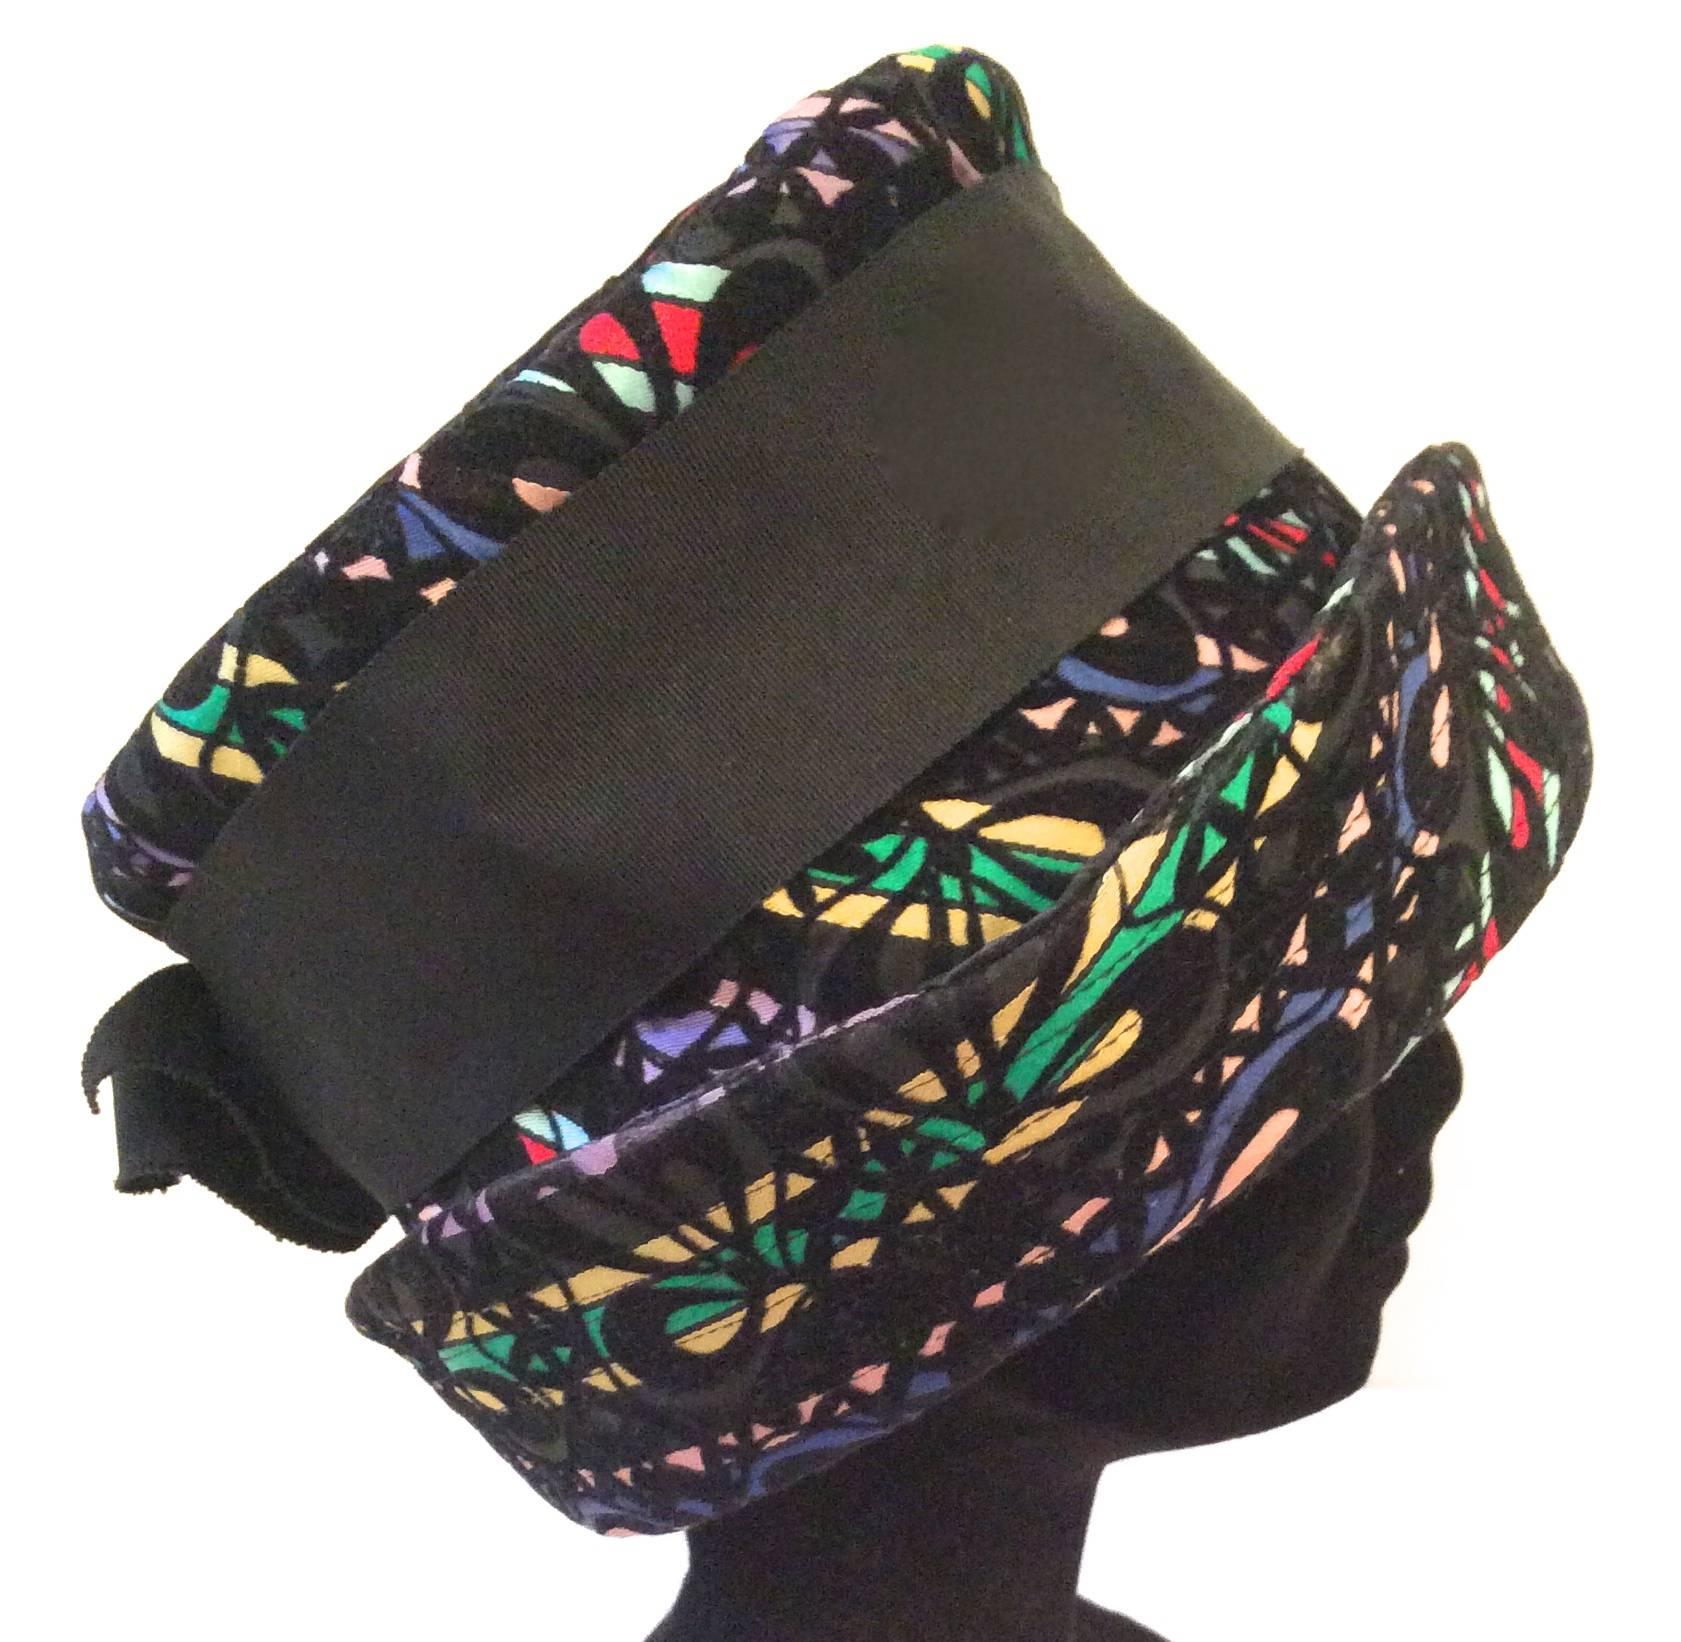 This fabulous multi-colored wide brimmed hat is from the late 1950's, early 1960's. It is in excellent condition. The hat encompasses a multi-colored striped background layered with black felt. Floral, geometric design. The beautiful underlying